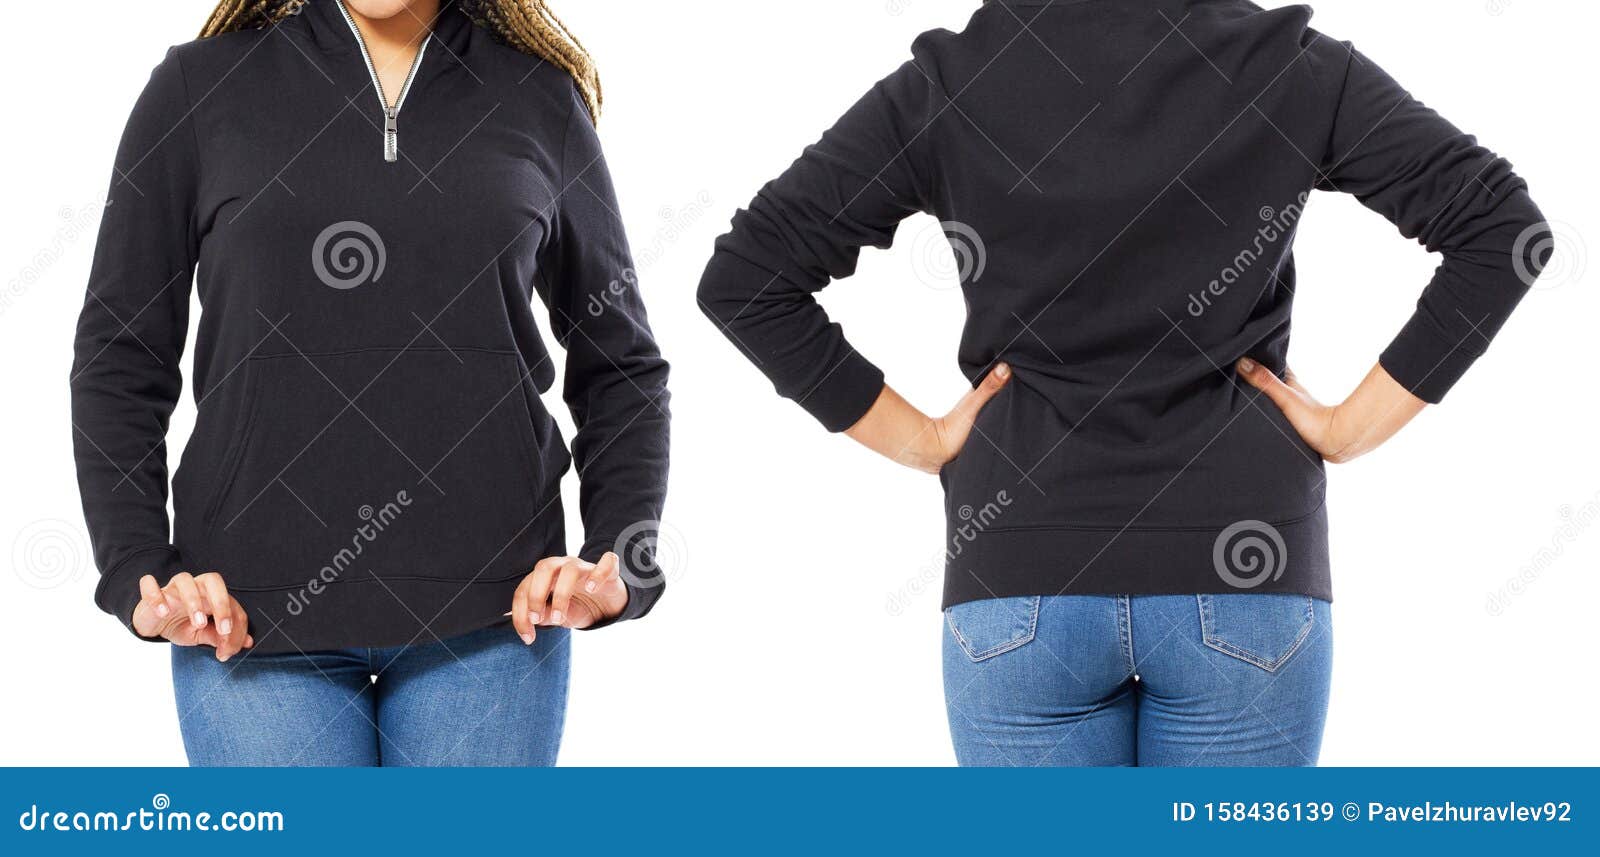 Download Hoodie Mock Up Set Front And Back View - Afro American ...